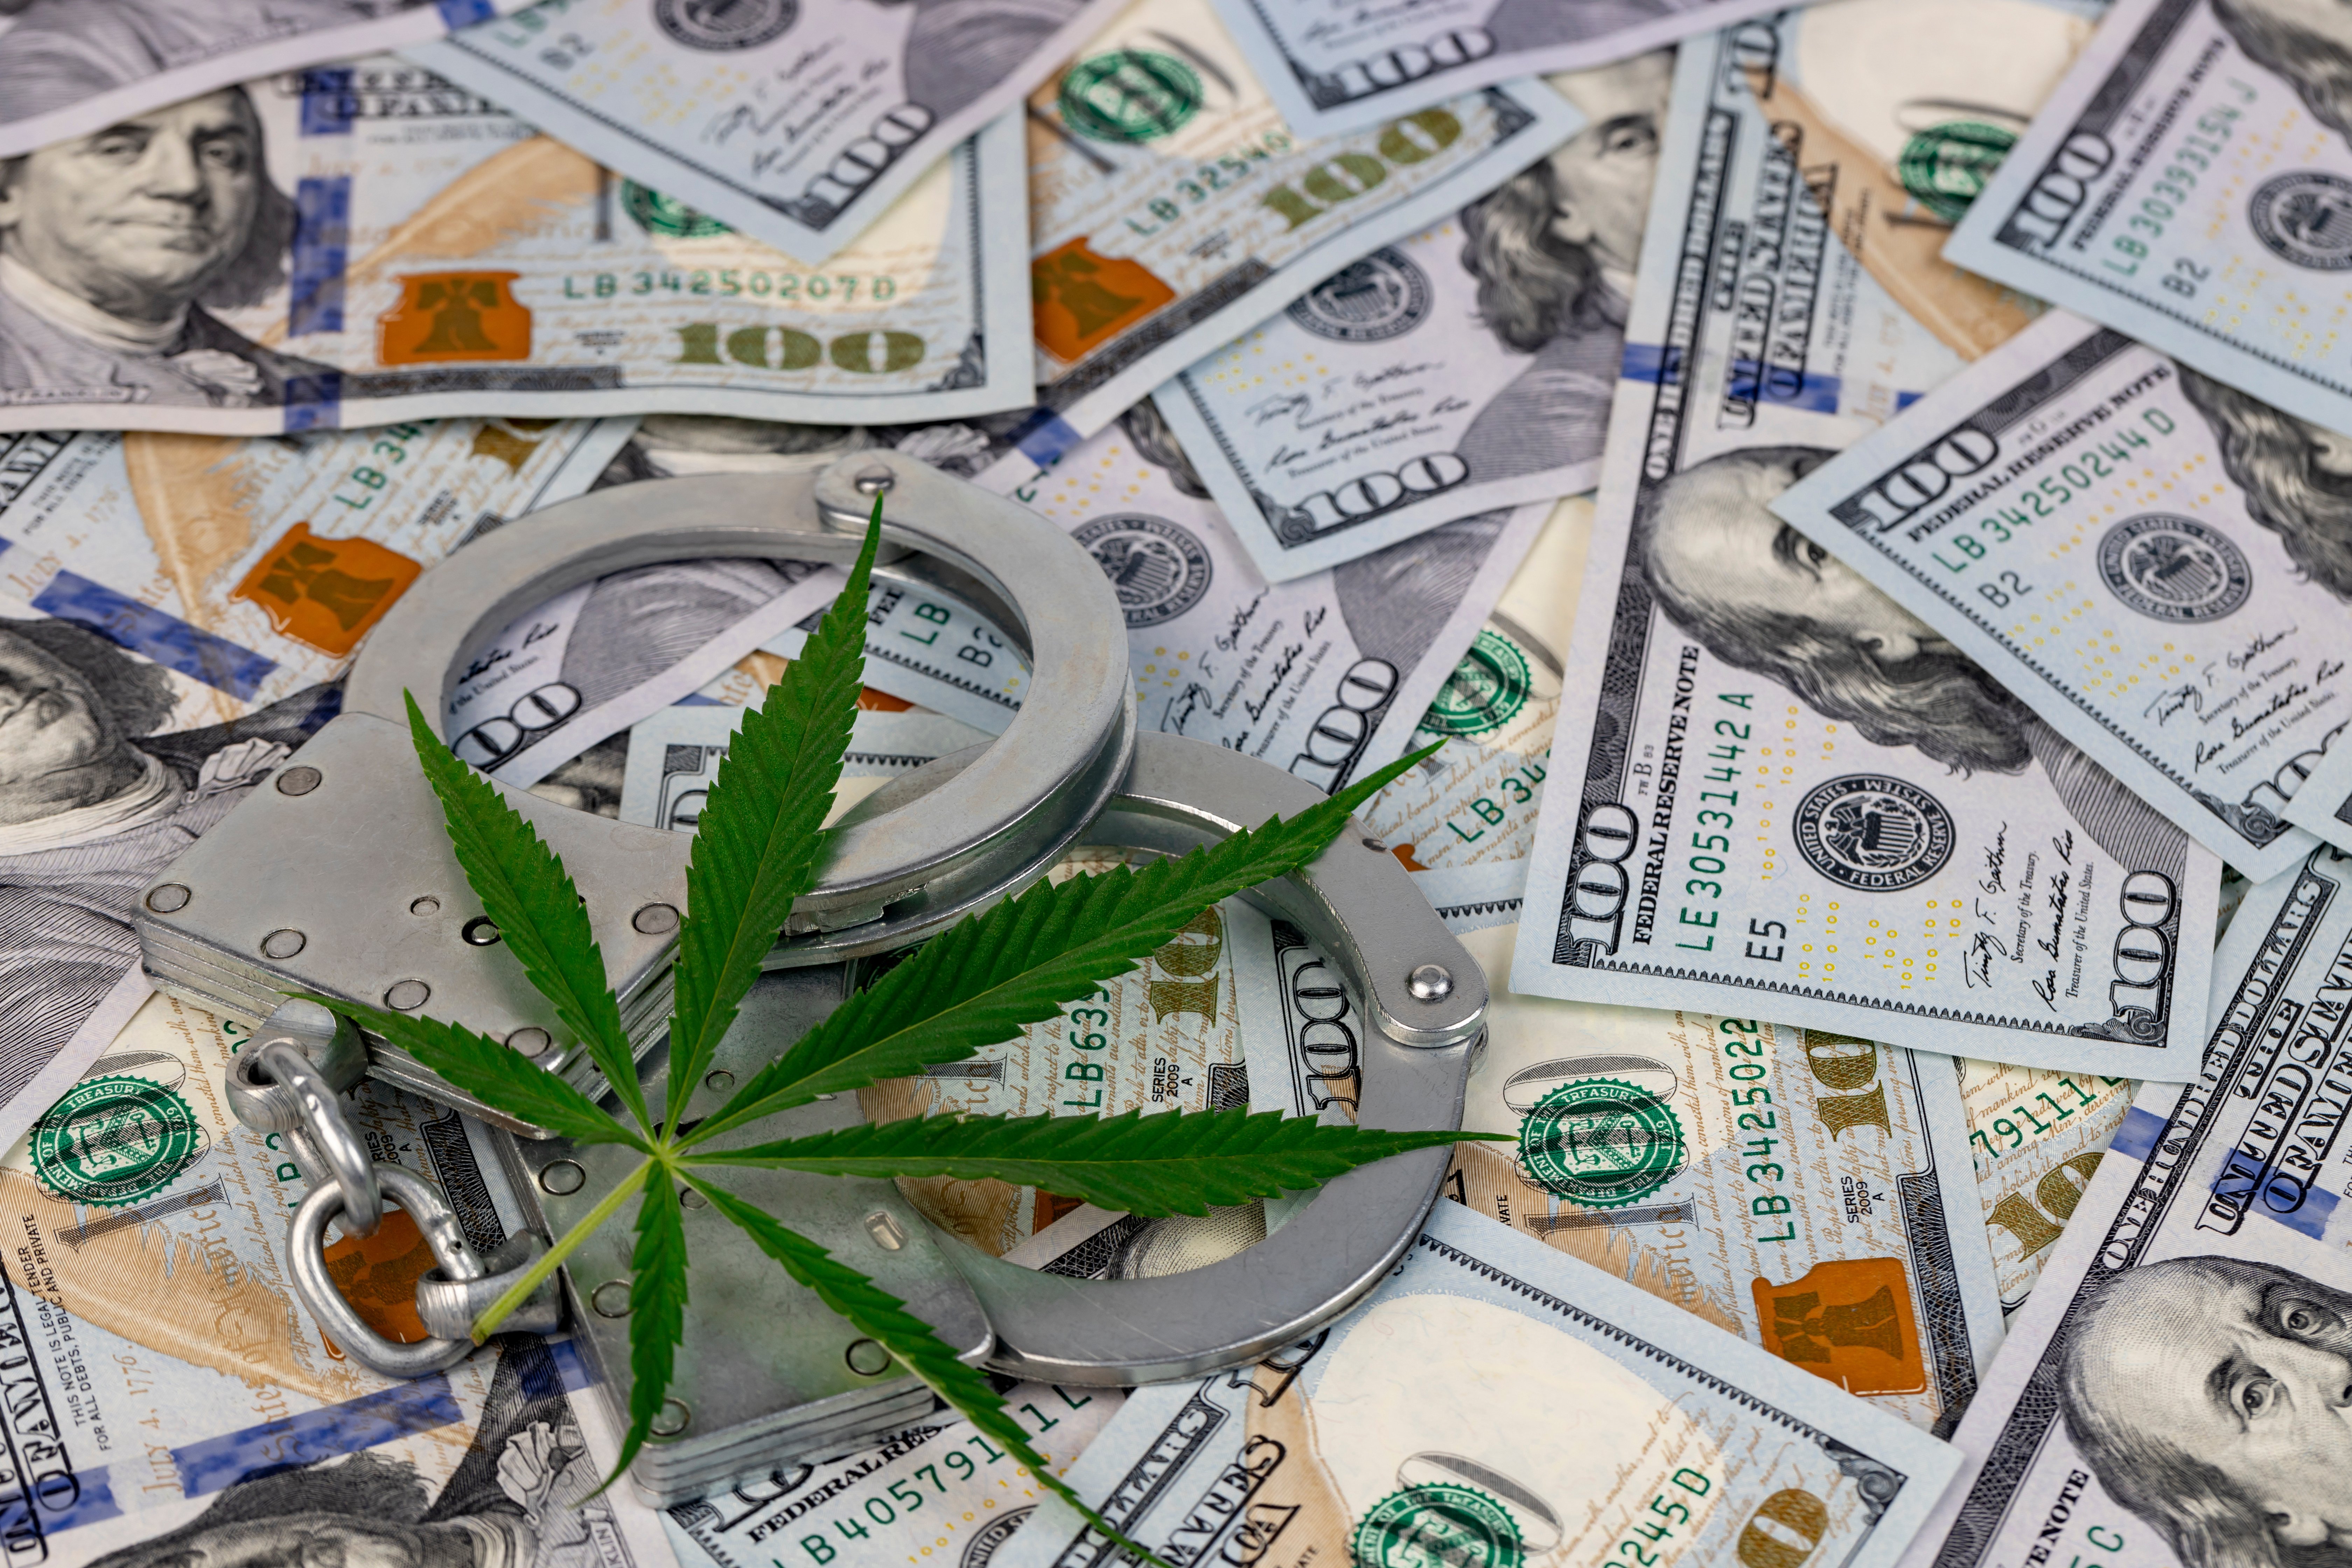 How to Set Up Cannabis Payroll